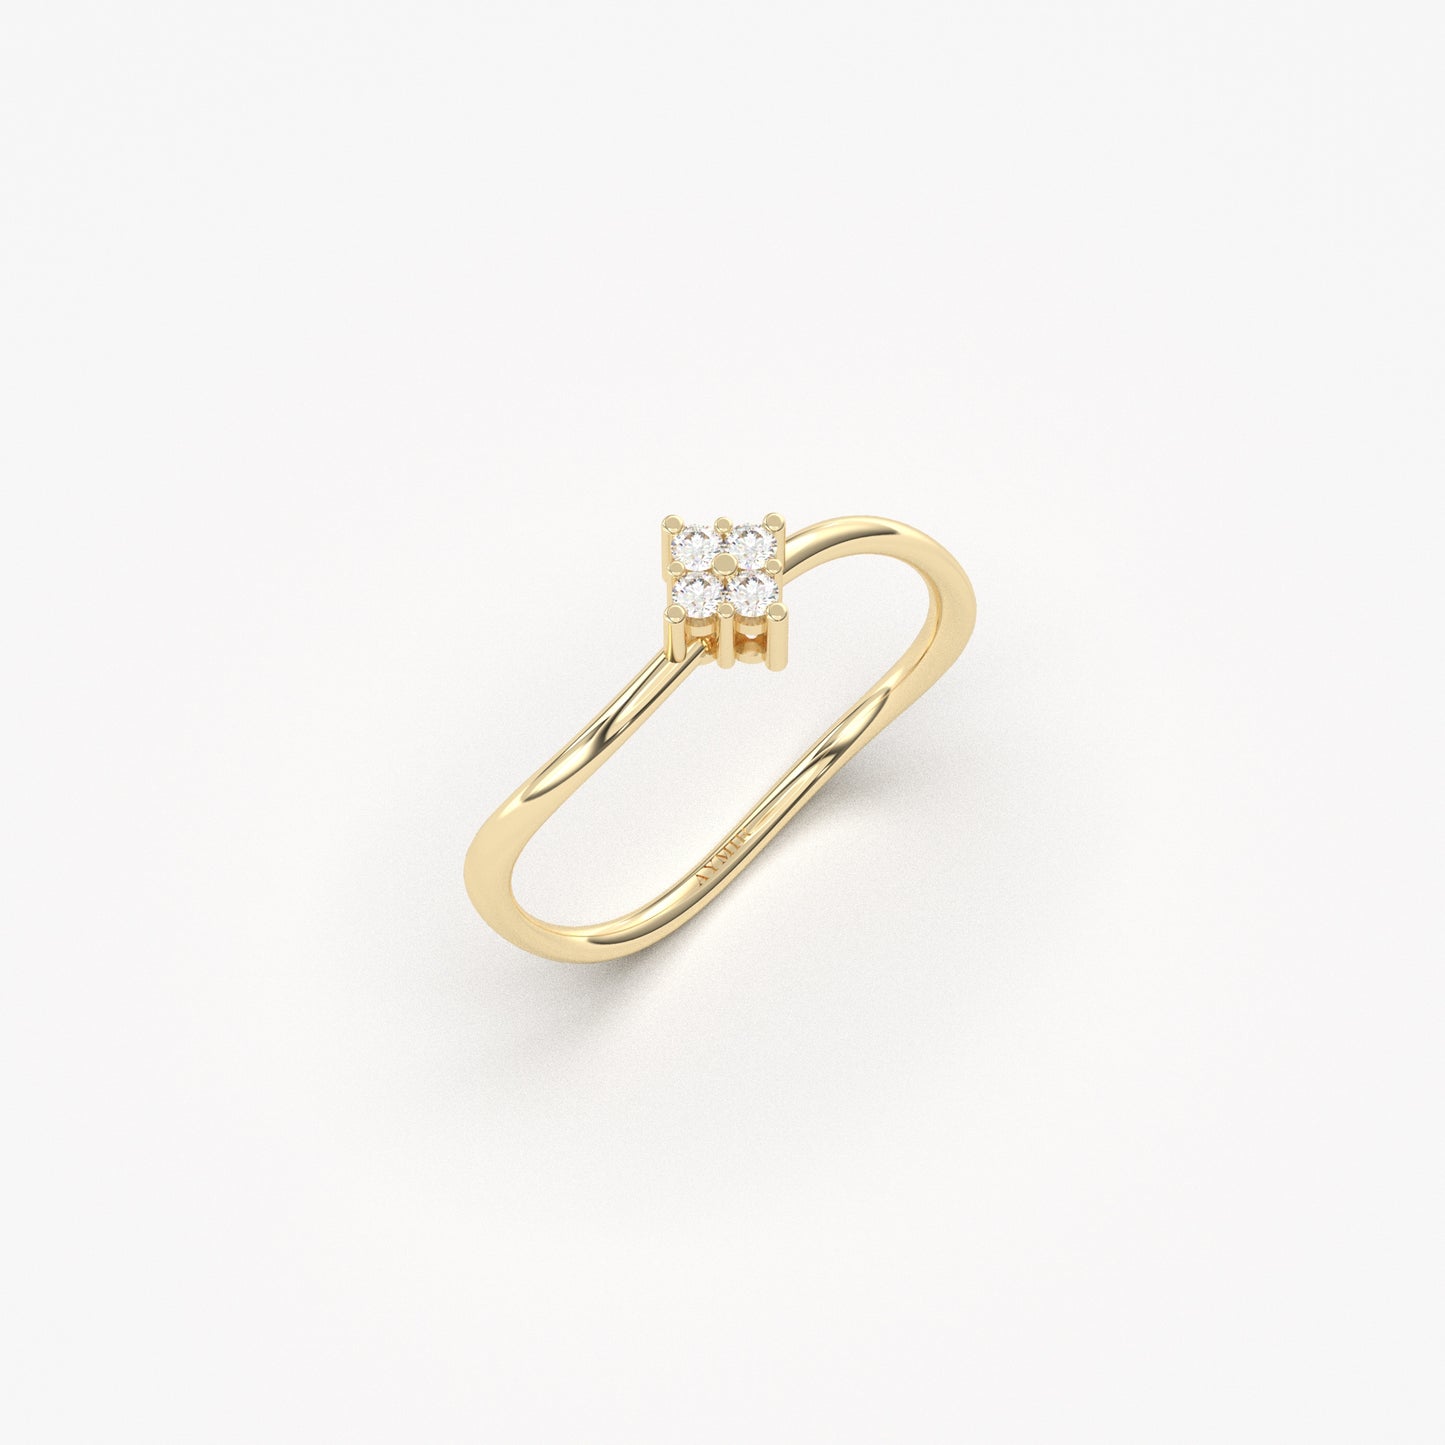 14K Gold Curved Diamond Seed Ring - 2S187